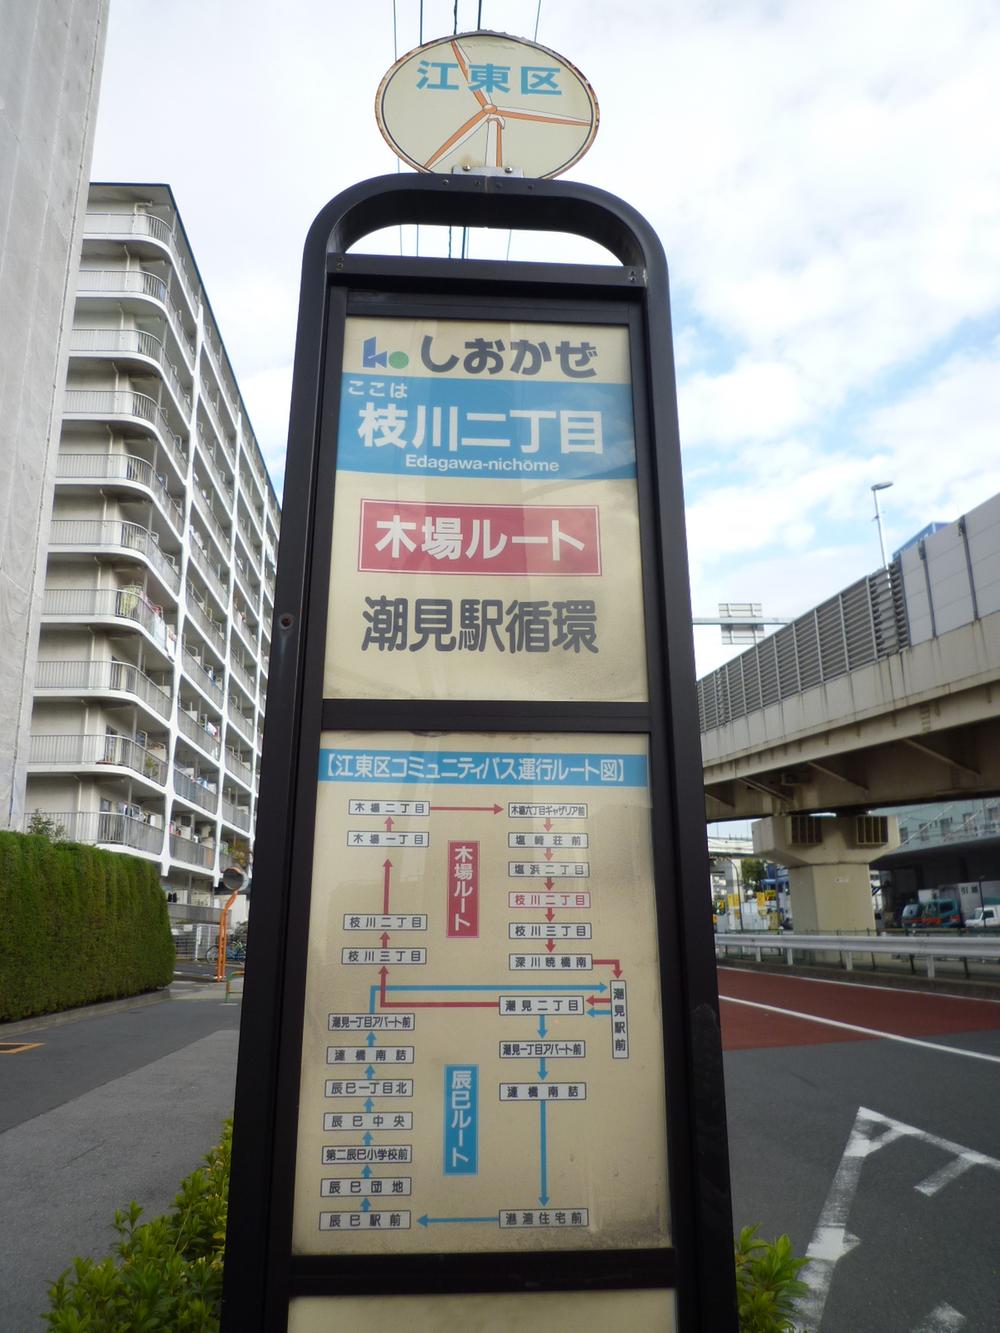 Other. There is a bus stop in Koto community bus in front of the apartment of the eye